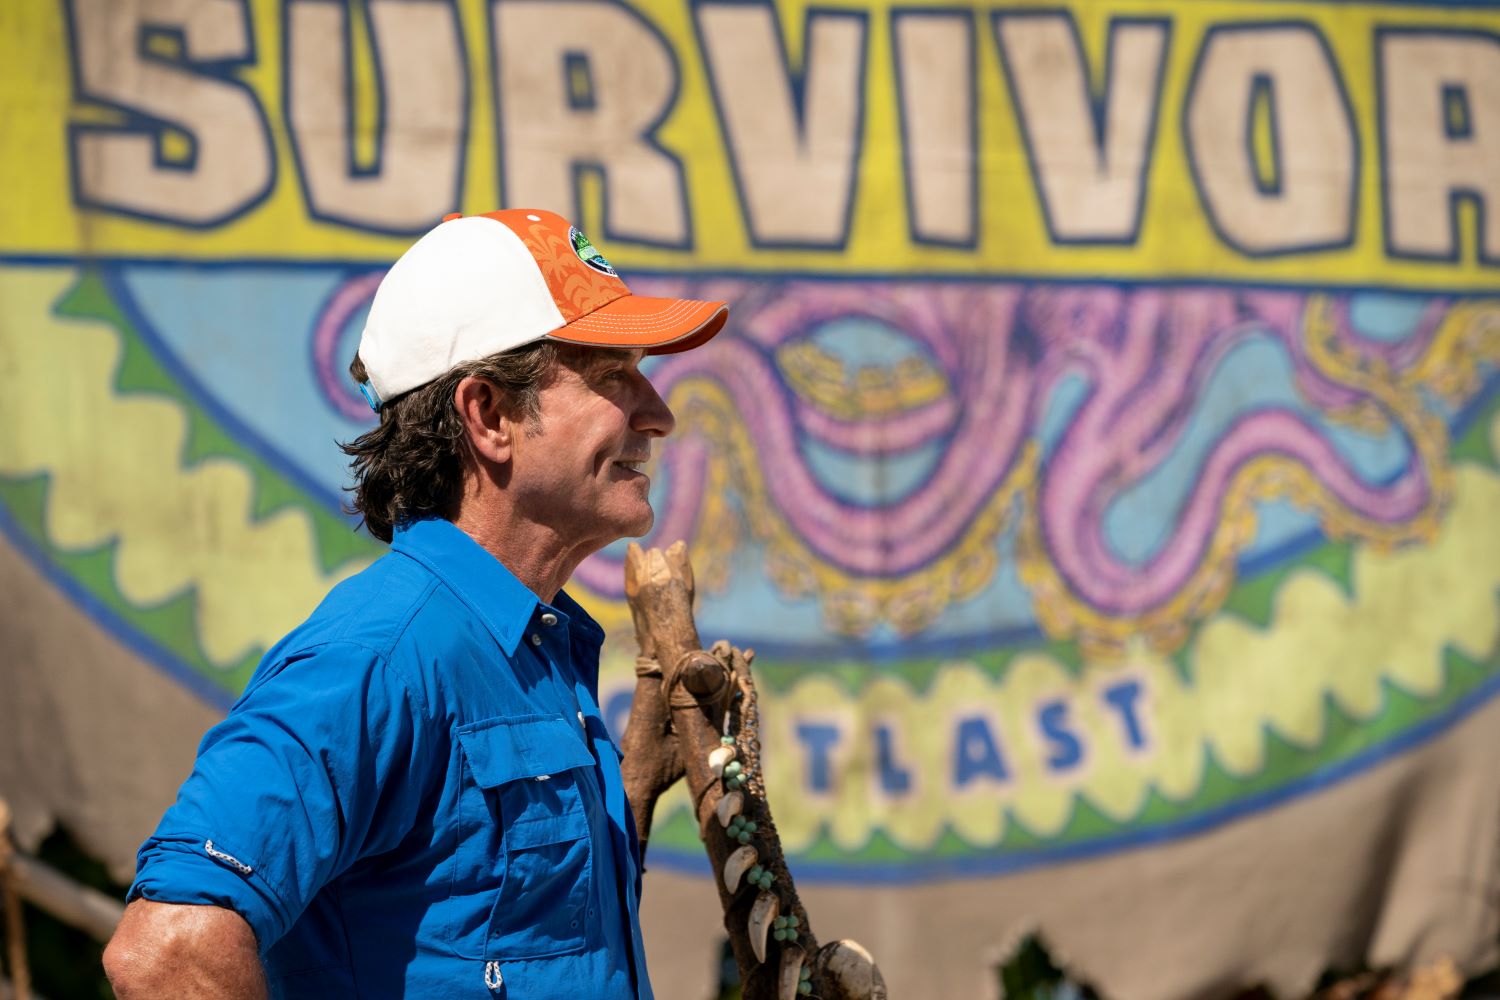 Jeff Probst, who has hosted all 44 seasons of 'Survivor' on CBS, wears a blue button-up shirt and a white and orange 'Survivor' baseball cap.